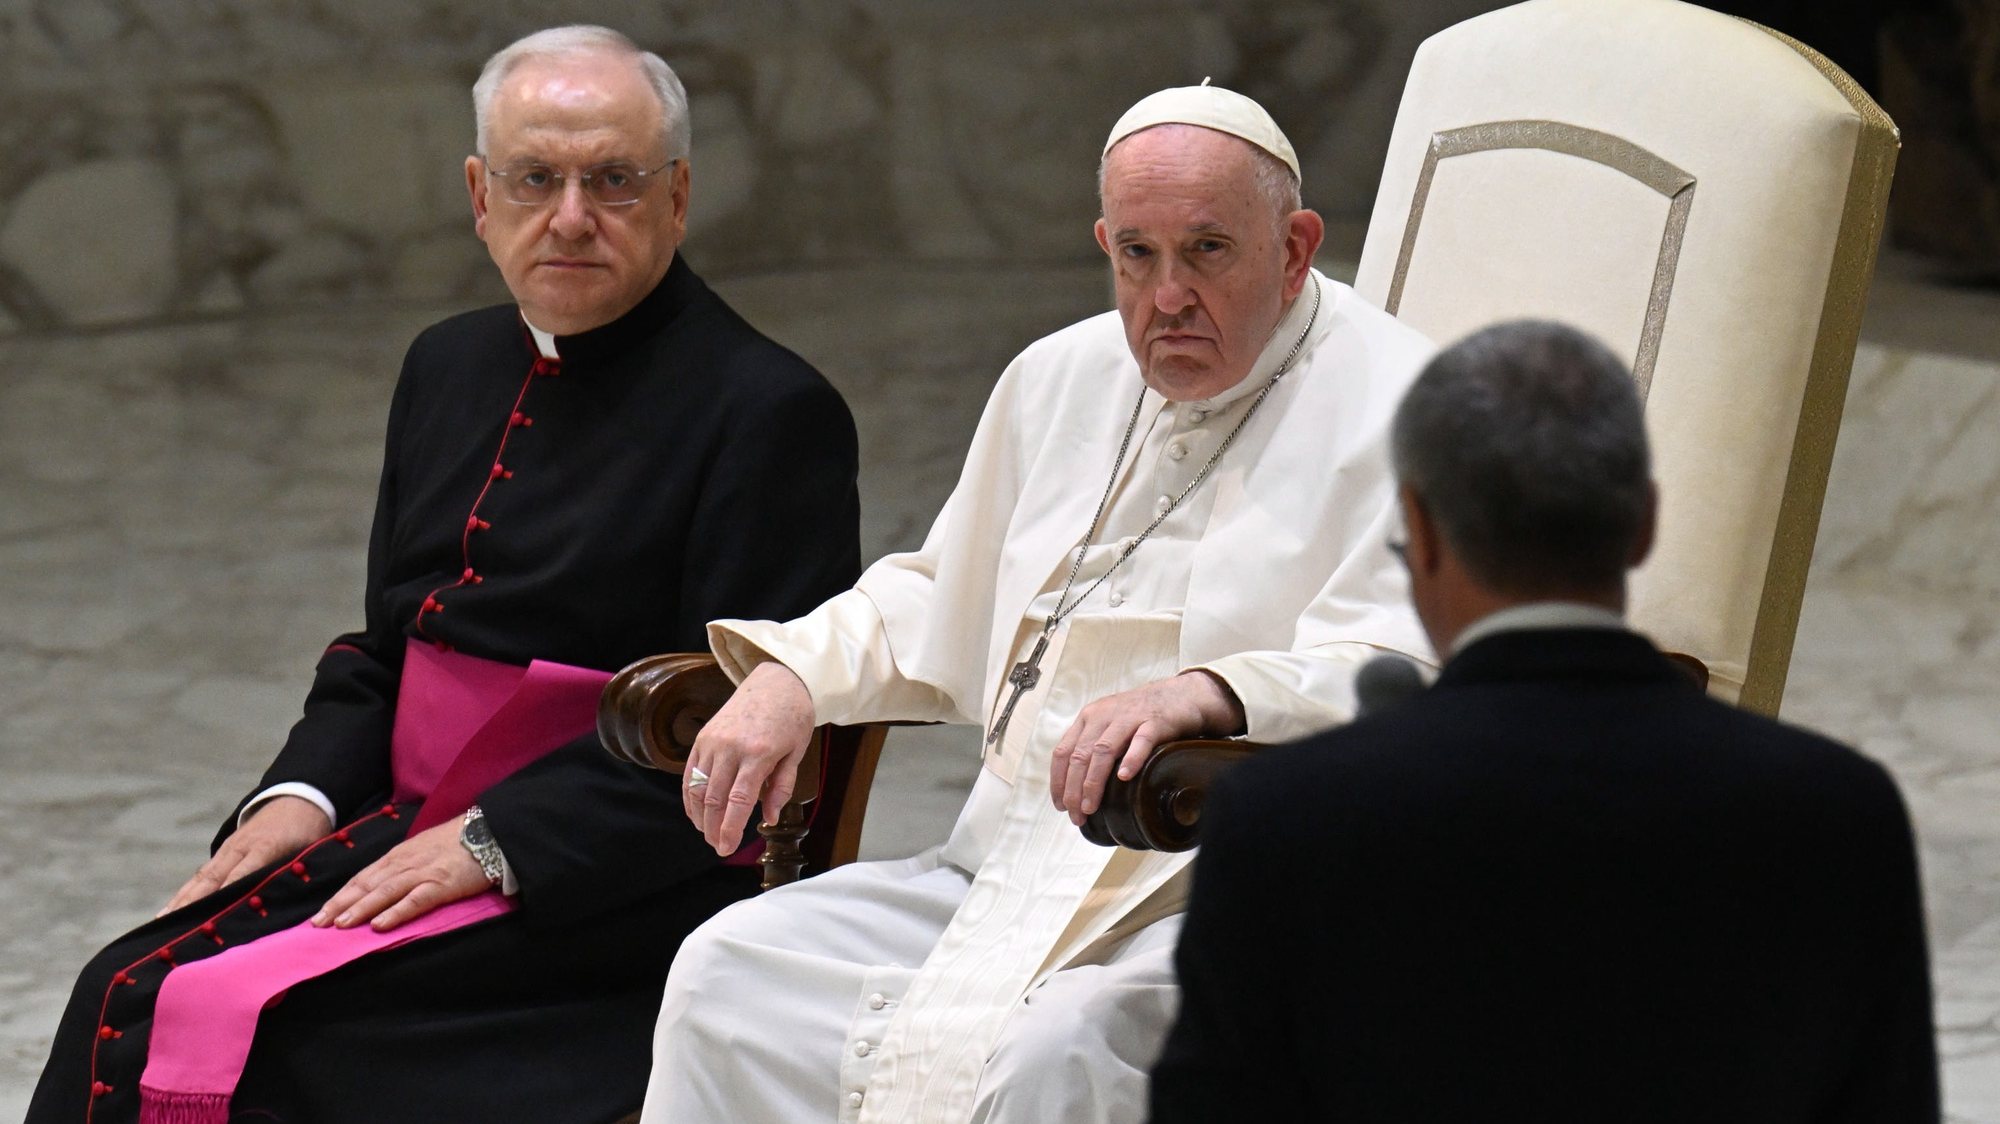 epa10179511 Pope Francis (C) sits next to Italian priest Monsignor Leonardo Sapienza (L) during an audience with members of the General Confederation of Italian Industry, commonly known as Confindustria, inside Nervi Hall at the Vatican, 12 September 2022.  EPA/CLAUDIO PERI